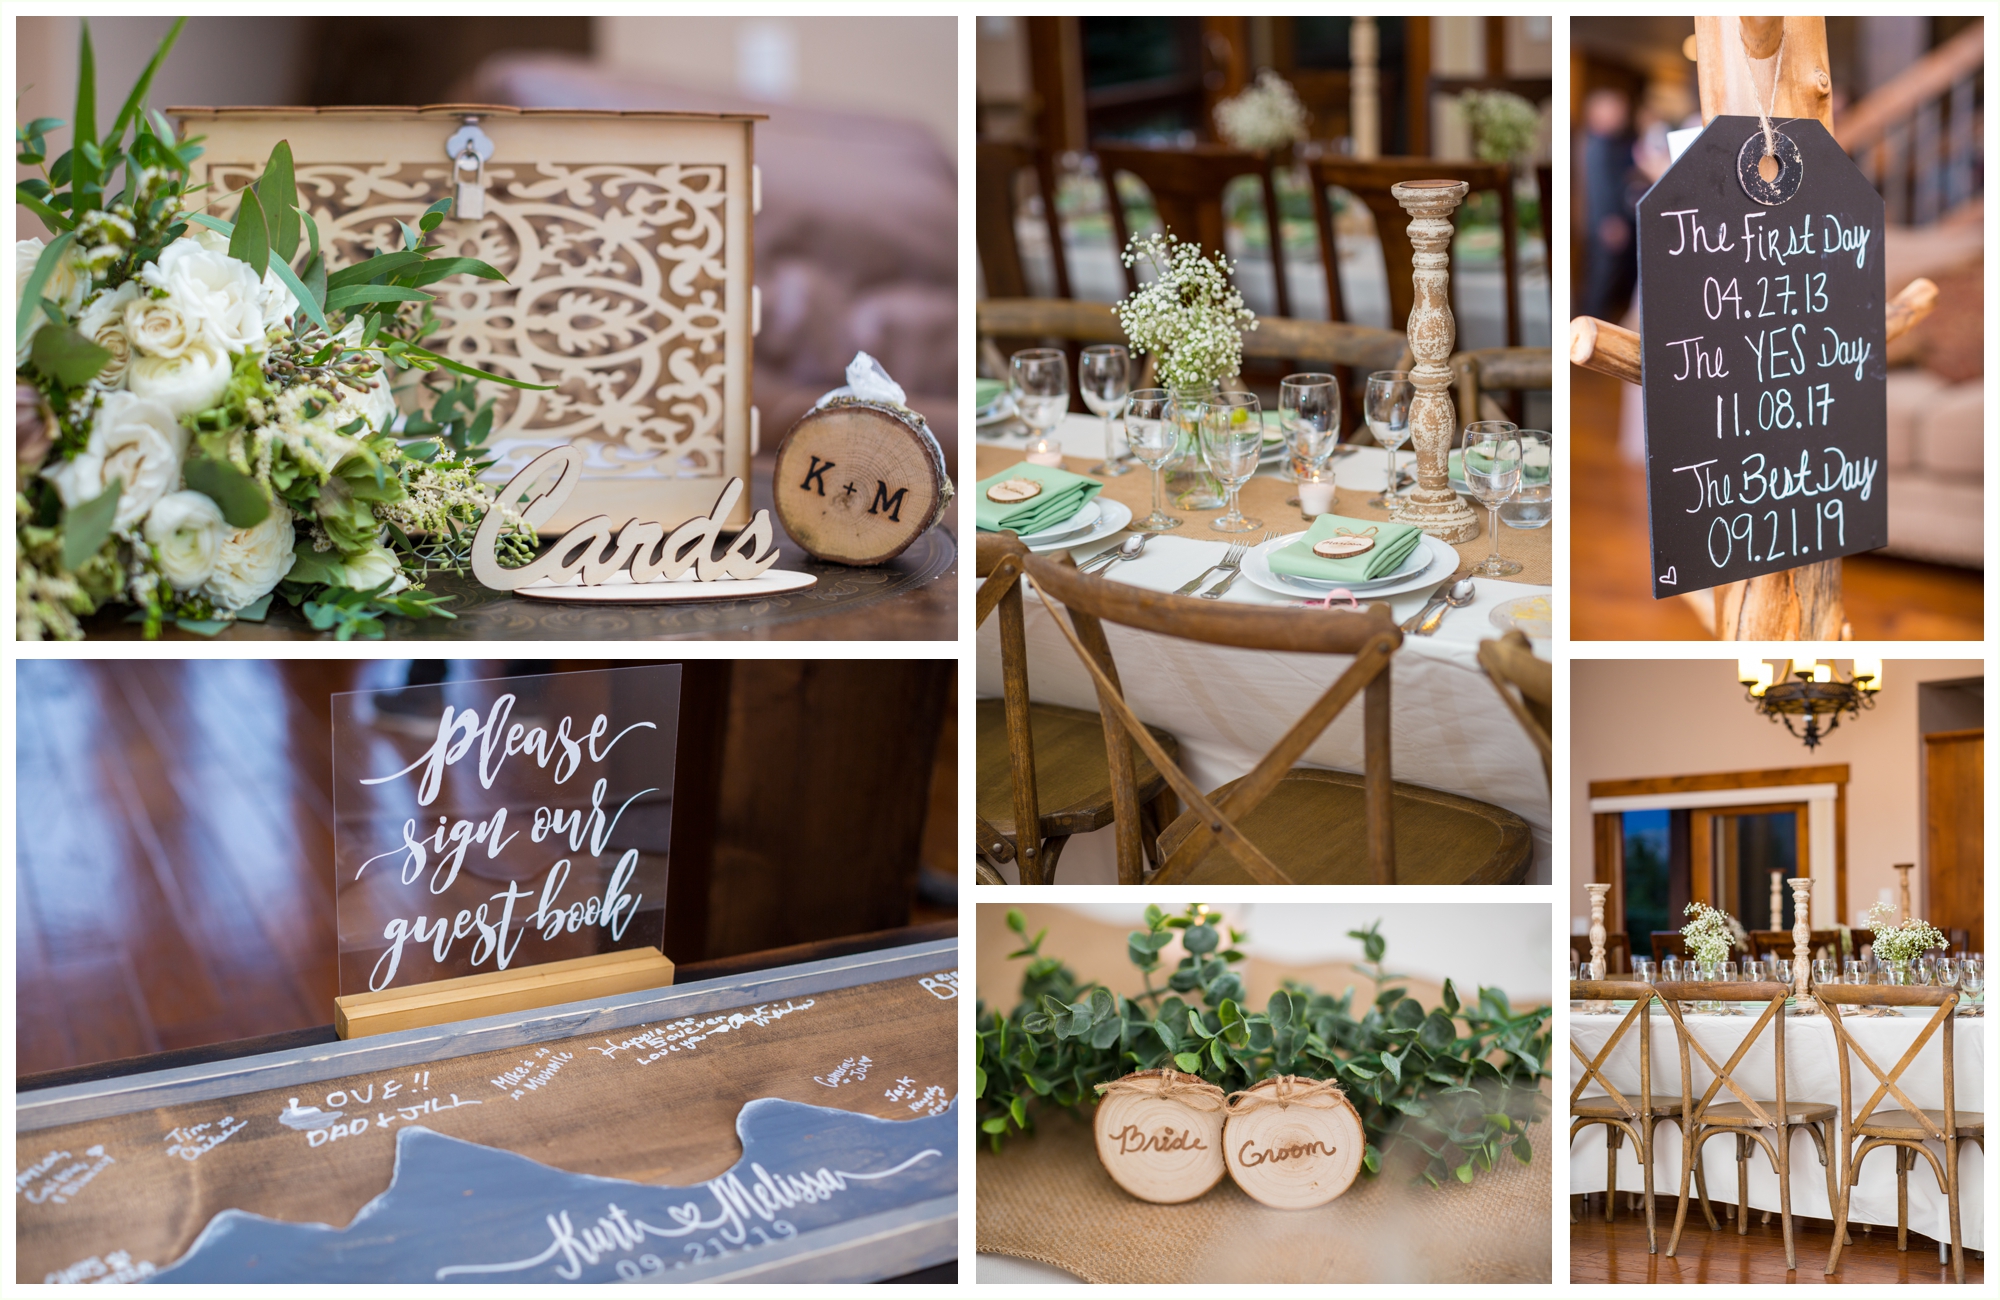 wedding reception details for private residence cabin in breckenridge colorad mountains